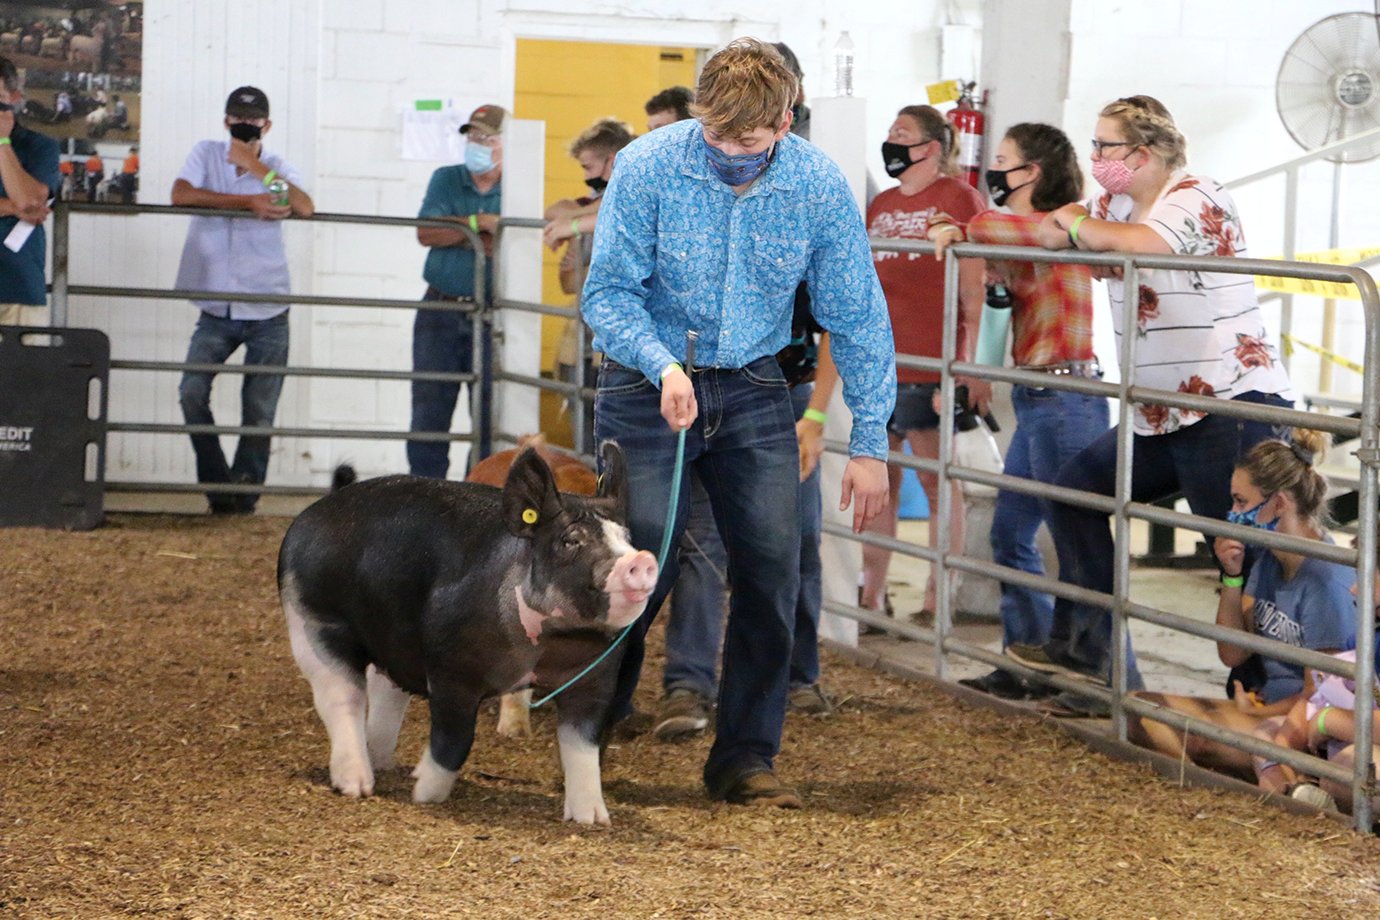 Collin Martin and his Reserve Grand Champion Gilt strut around the ring this weekend at the 2020 Montgomery County 4-H Fair. The 2020 4-H Fair marks the first time Southmont